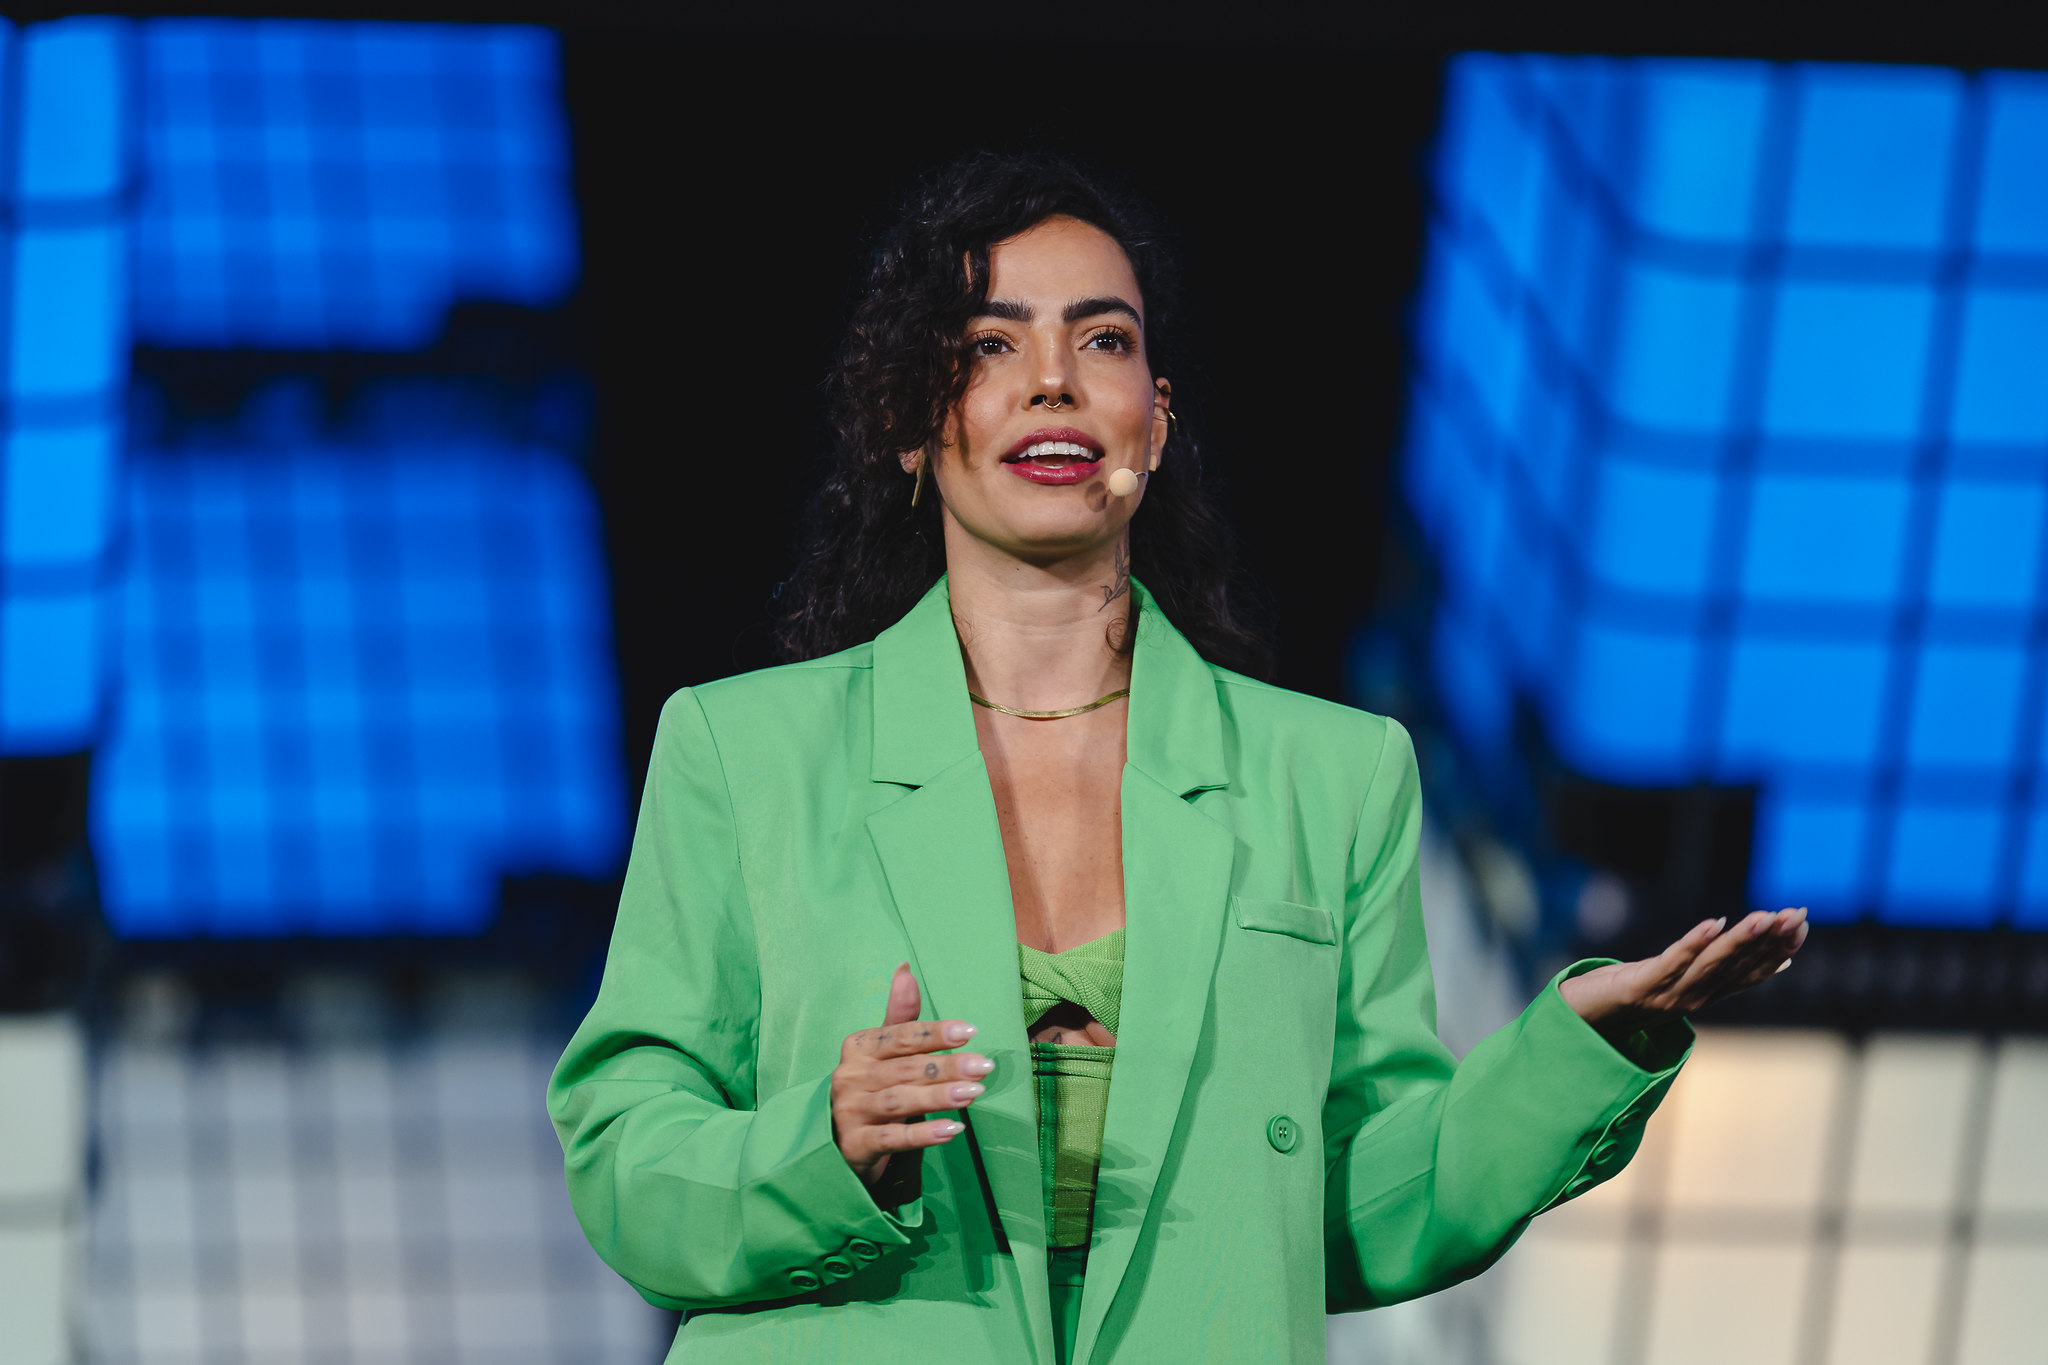 Photograph of a person (Laura Vicente, presenter at Globo) speaking onstage at Web Summit Rio. They are wearing a microphone and gesturing with their hands.